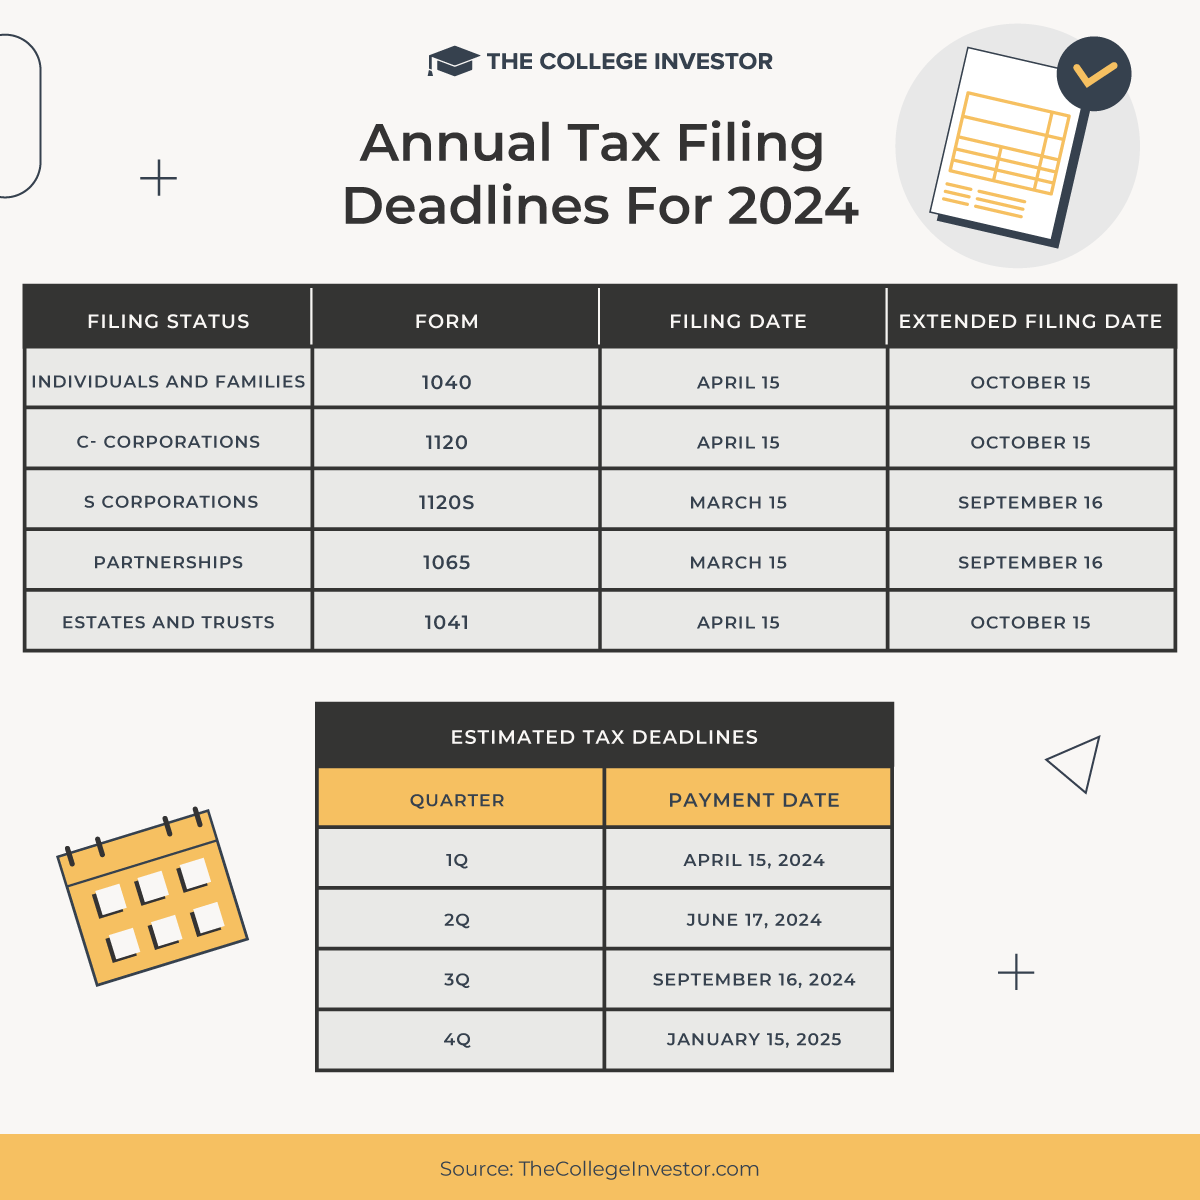 FICA Tax Refund Timeline - About 6 Months with Employer Letter and Required  Documents